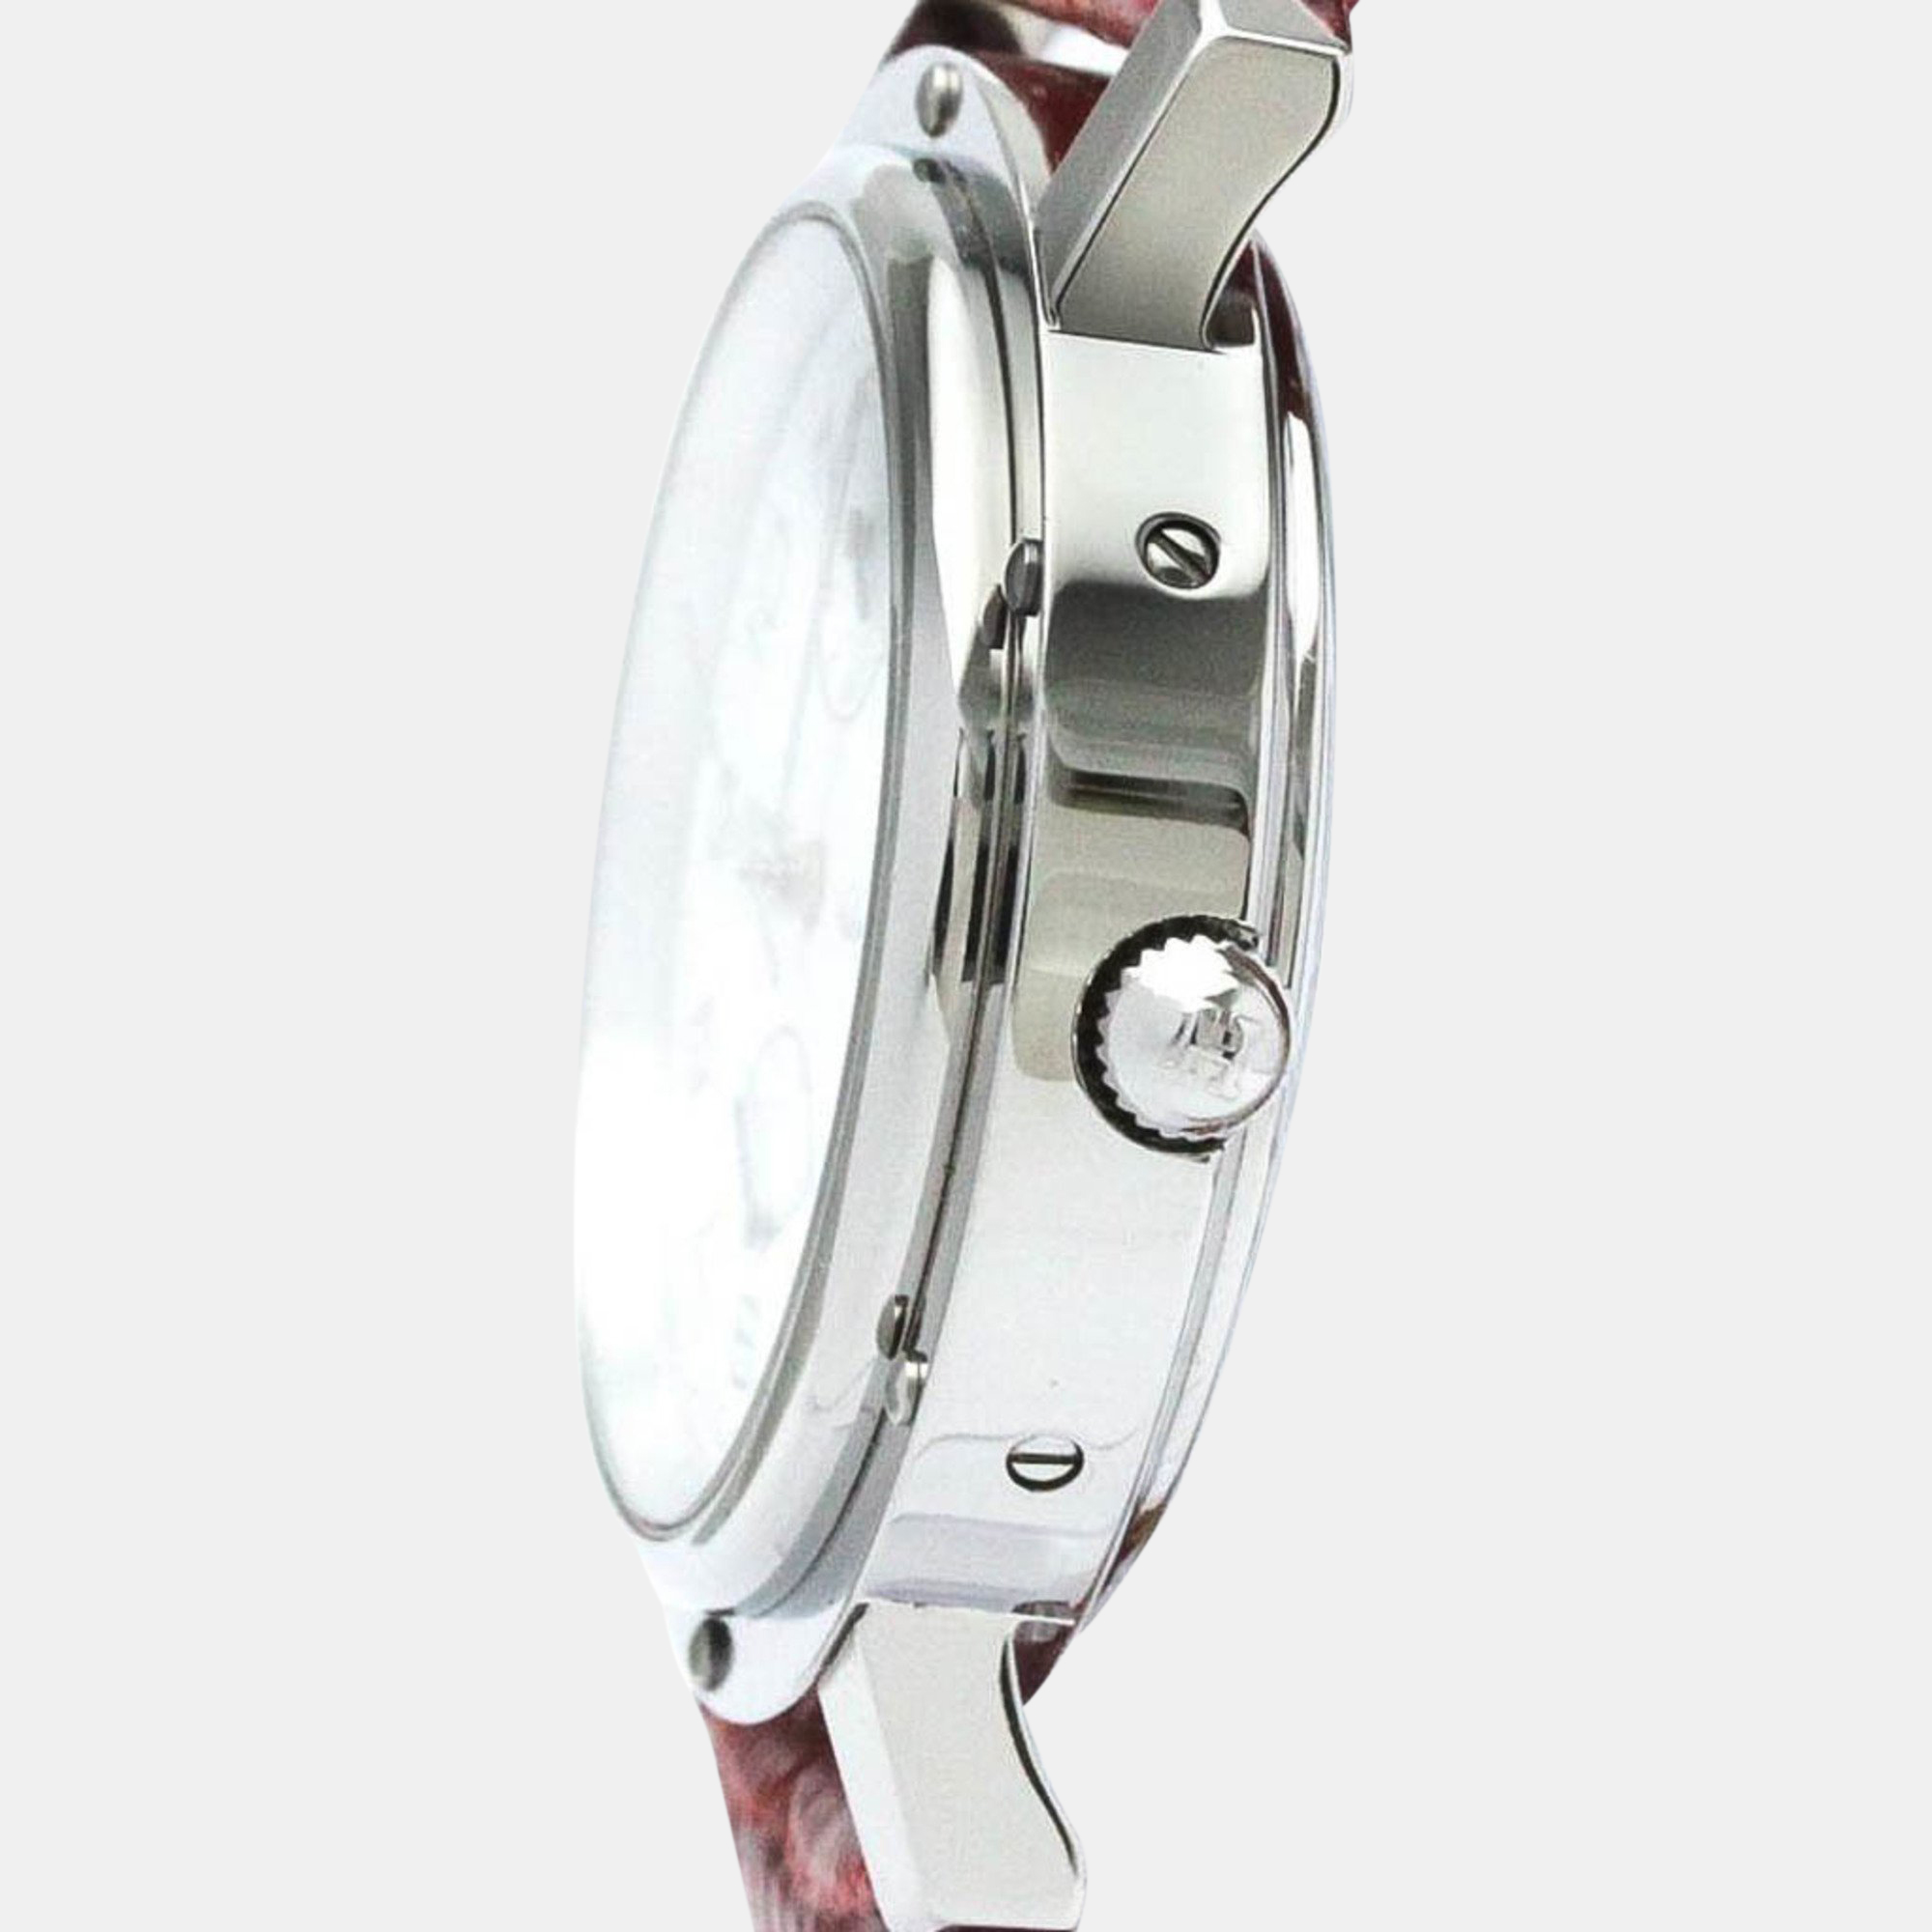 Hermes White Stainless Steel Clipper CL5.710 Automatic Men's Wristwatch 36 Mm